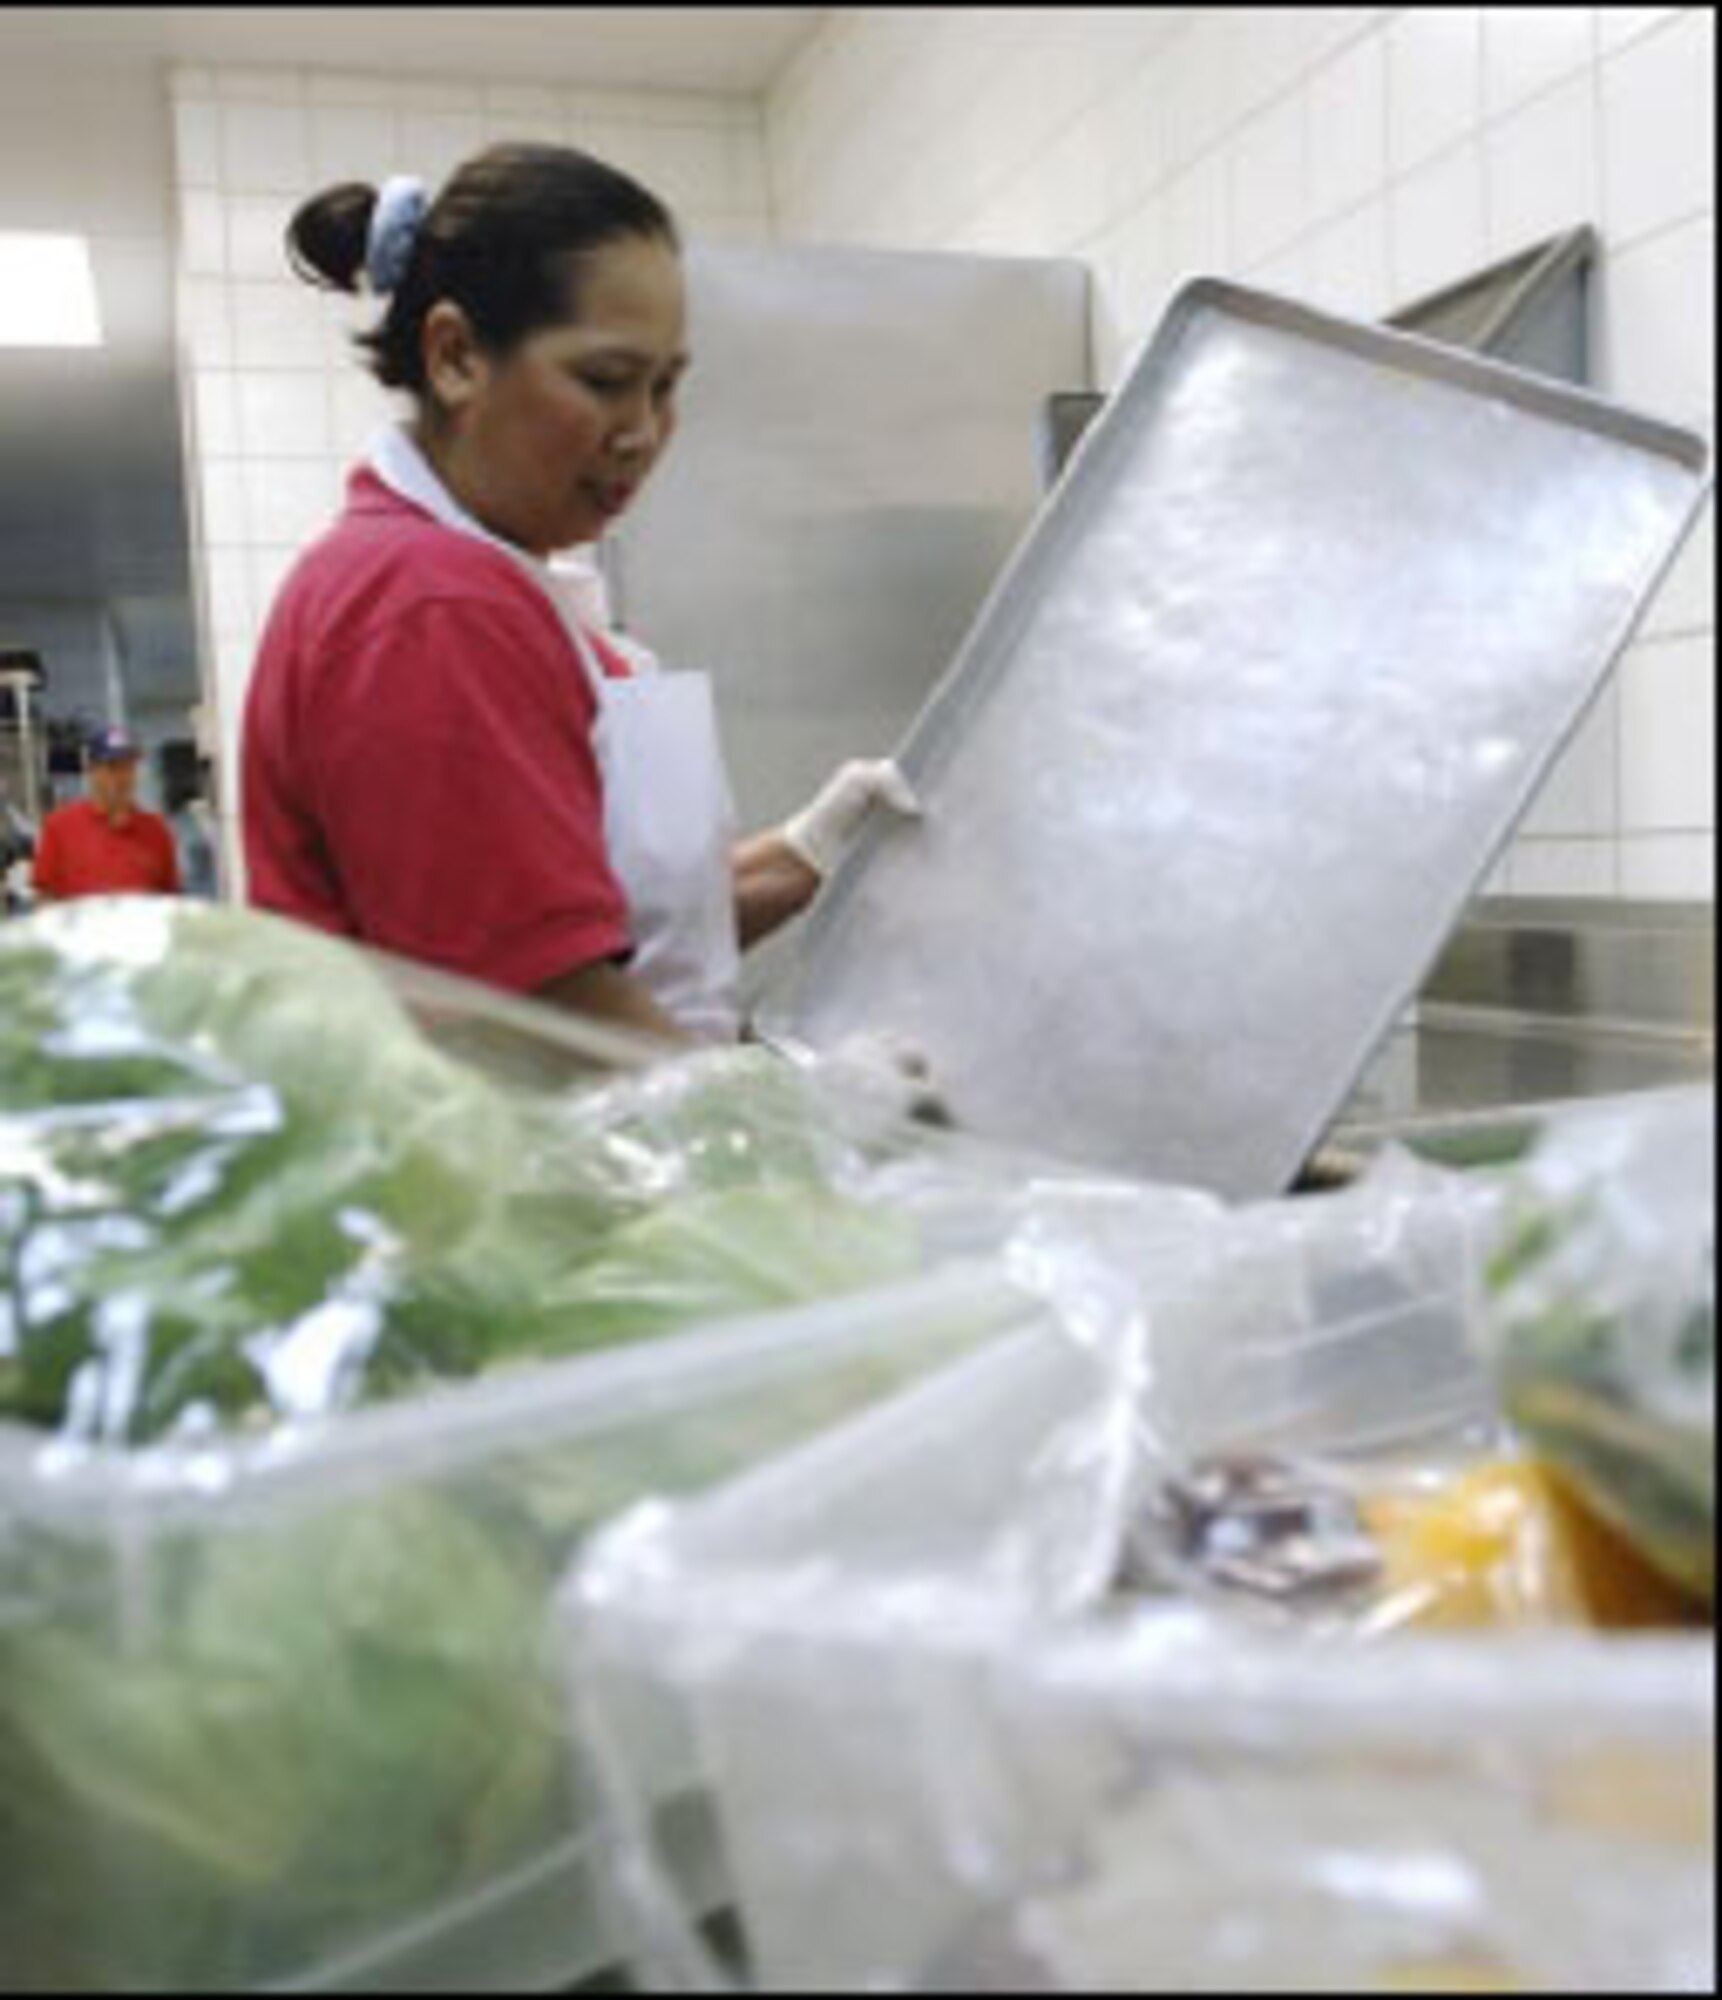 Kahmtan Greenlee, 22nd Services Squadron server, cleans a tray to arrange freshly sliced vegetables to serve at the salad bar. (U.S. Air Force photo/Master Sgt. Maurice Hessel)